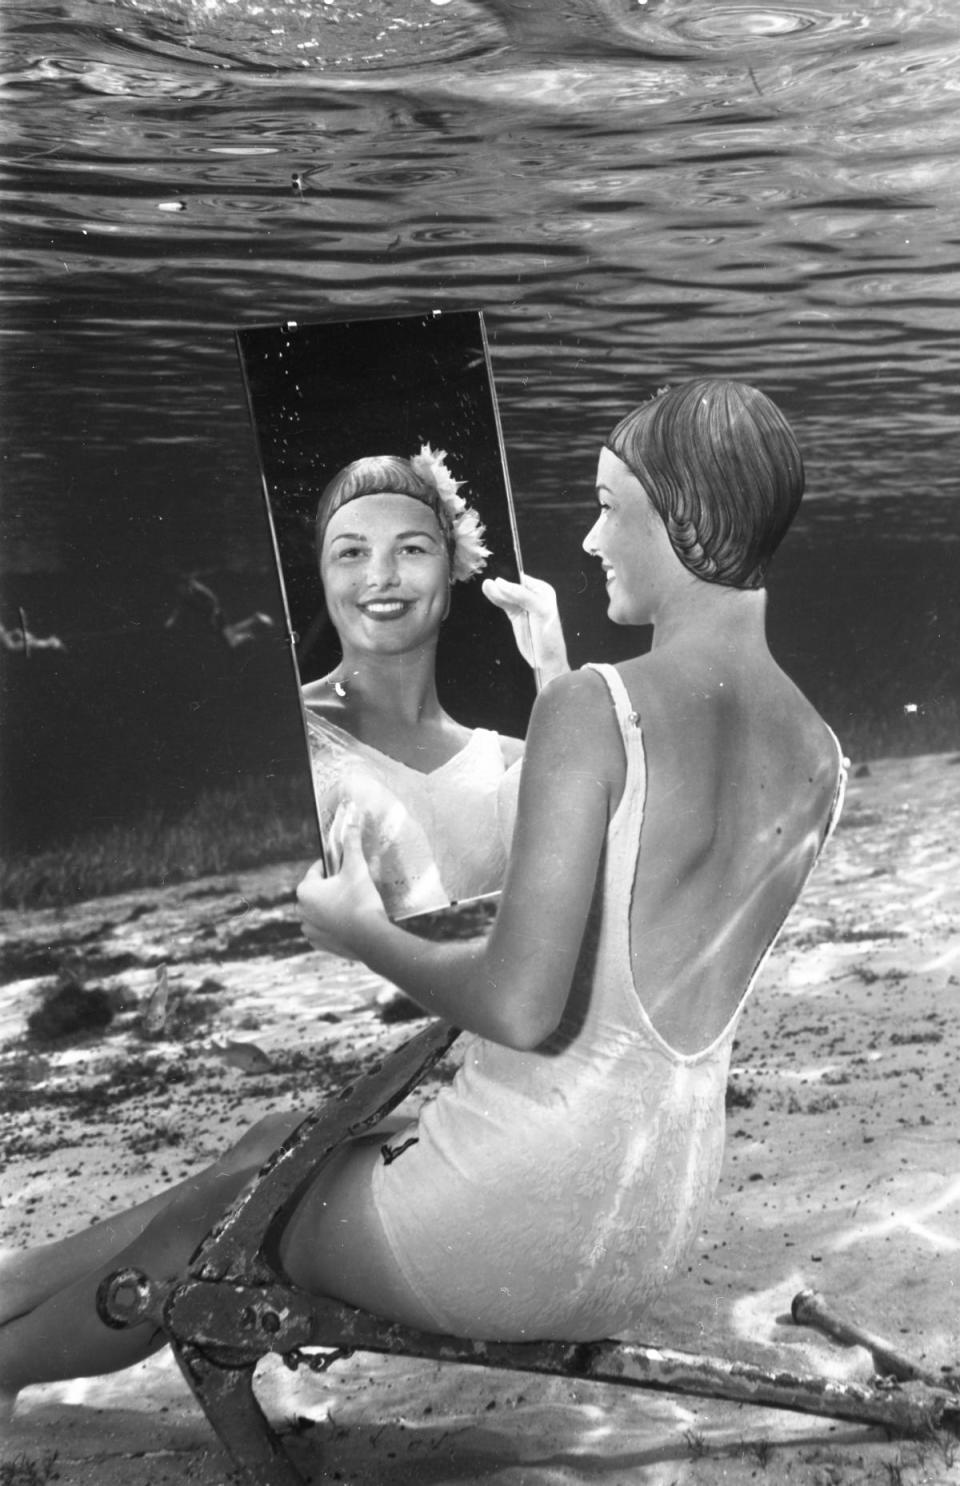 A model smiles at her reflection under water at Silver Springs near Ocala in this photo from Bruce Mozert from around 1950.